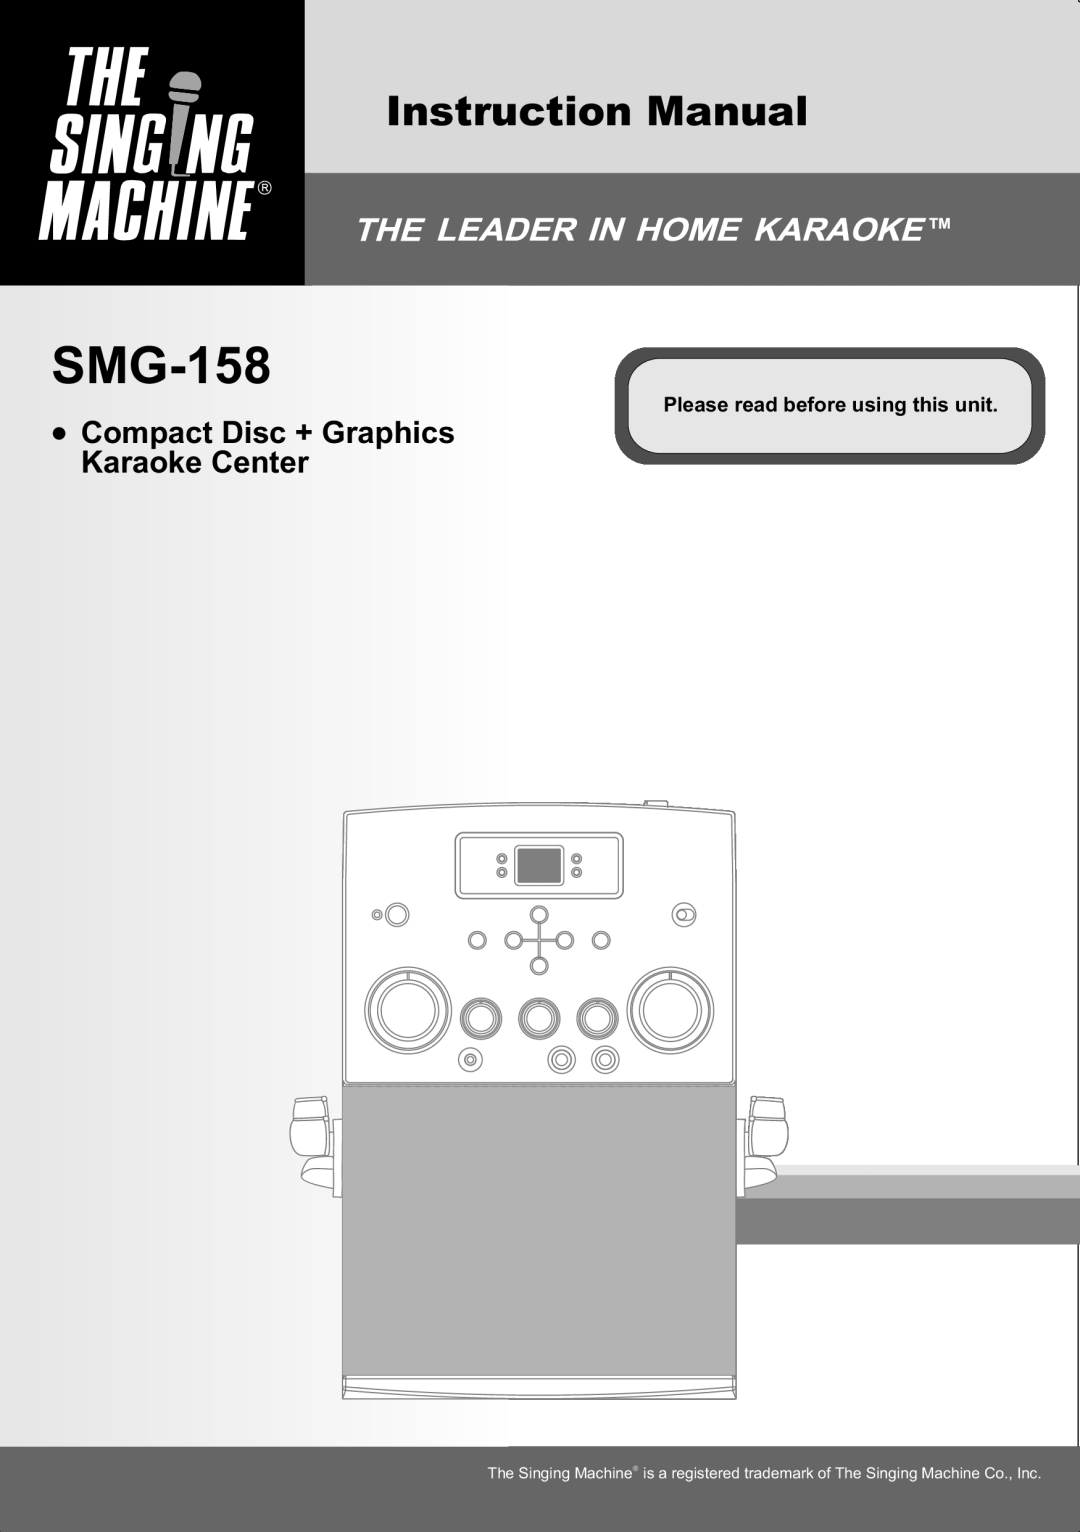 The Singing Machine SMG-158 instruction manual Compact Disc + Graphics Karaoke Center, Please read before using this unit 